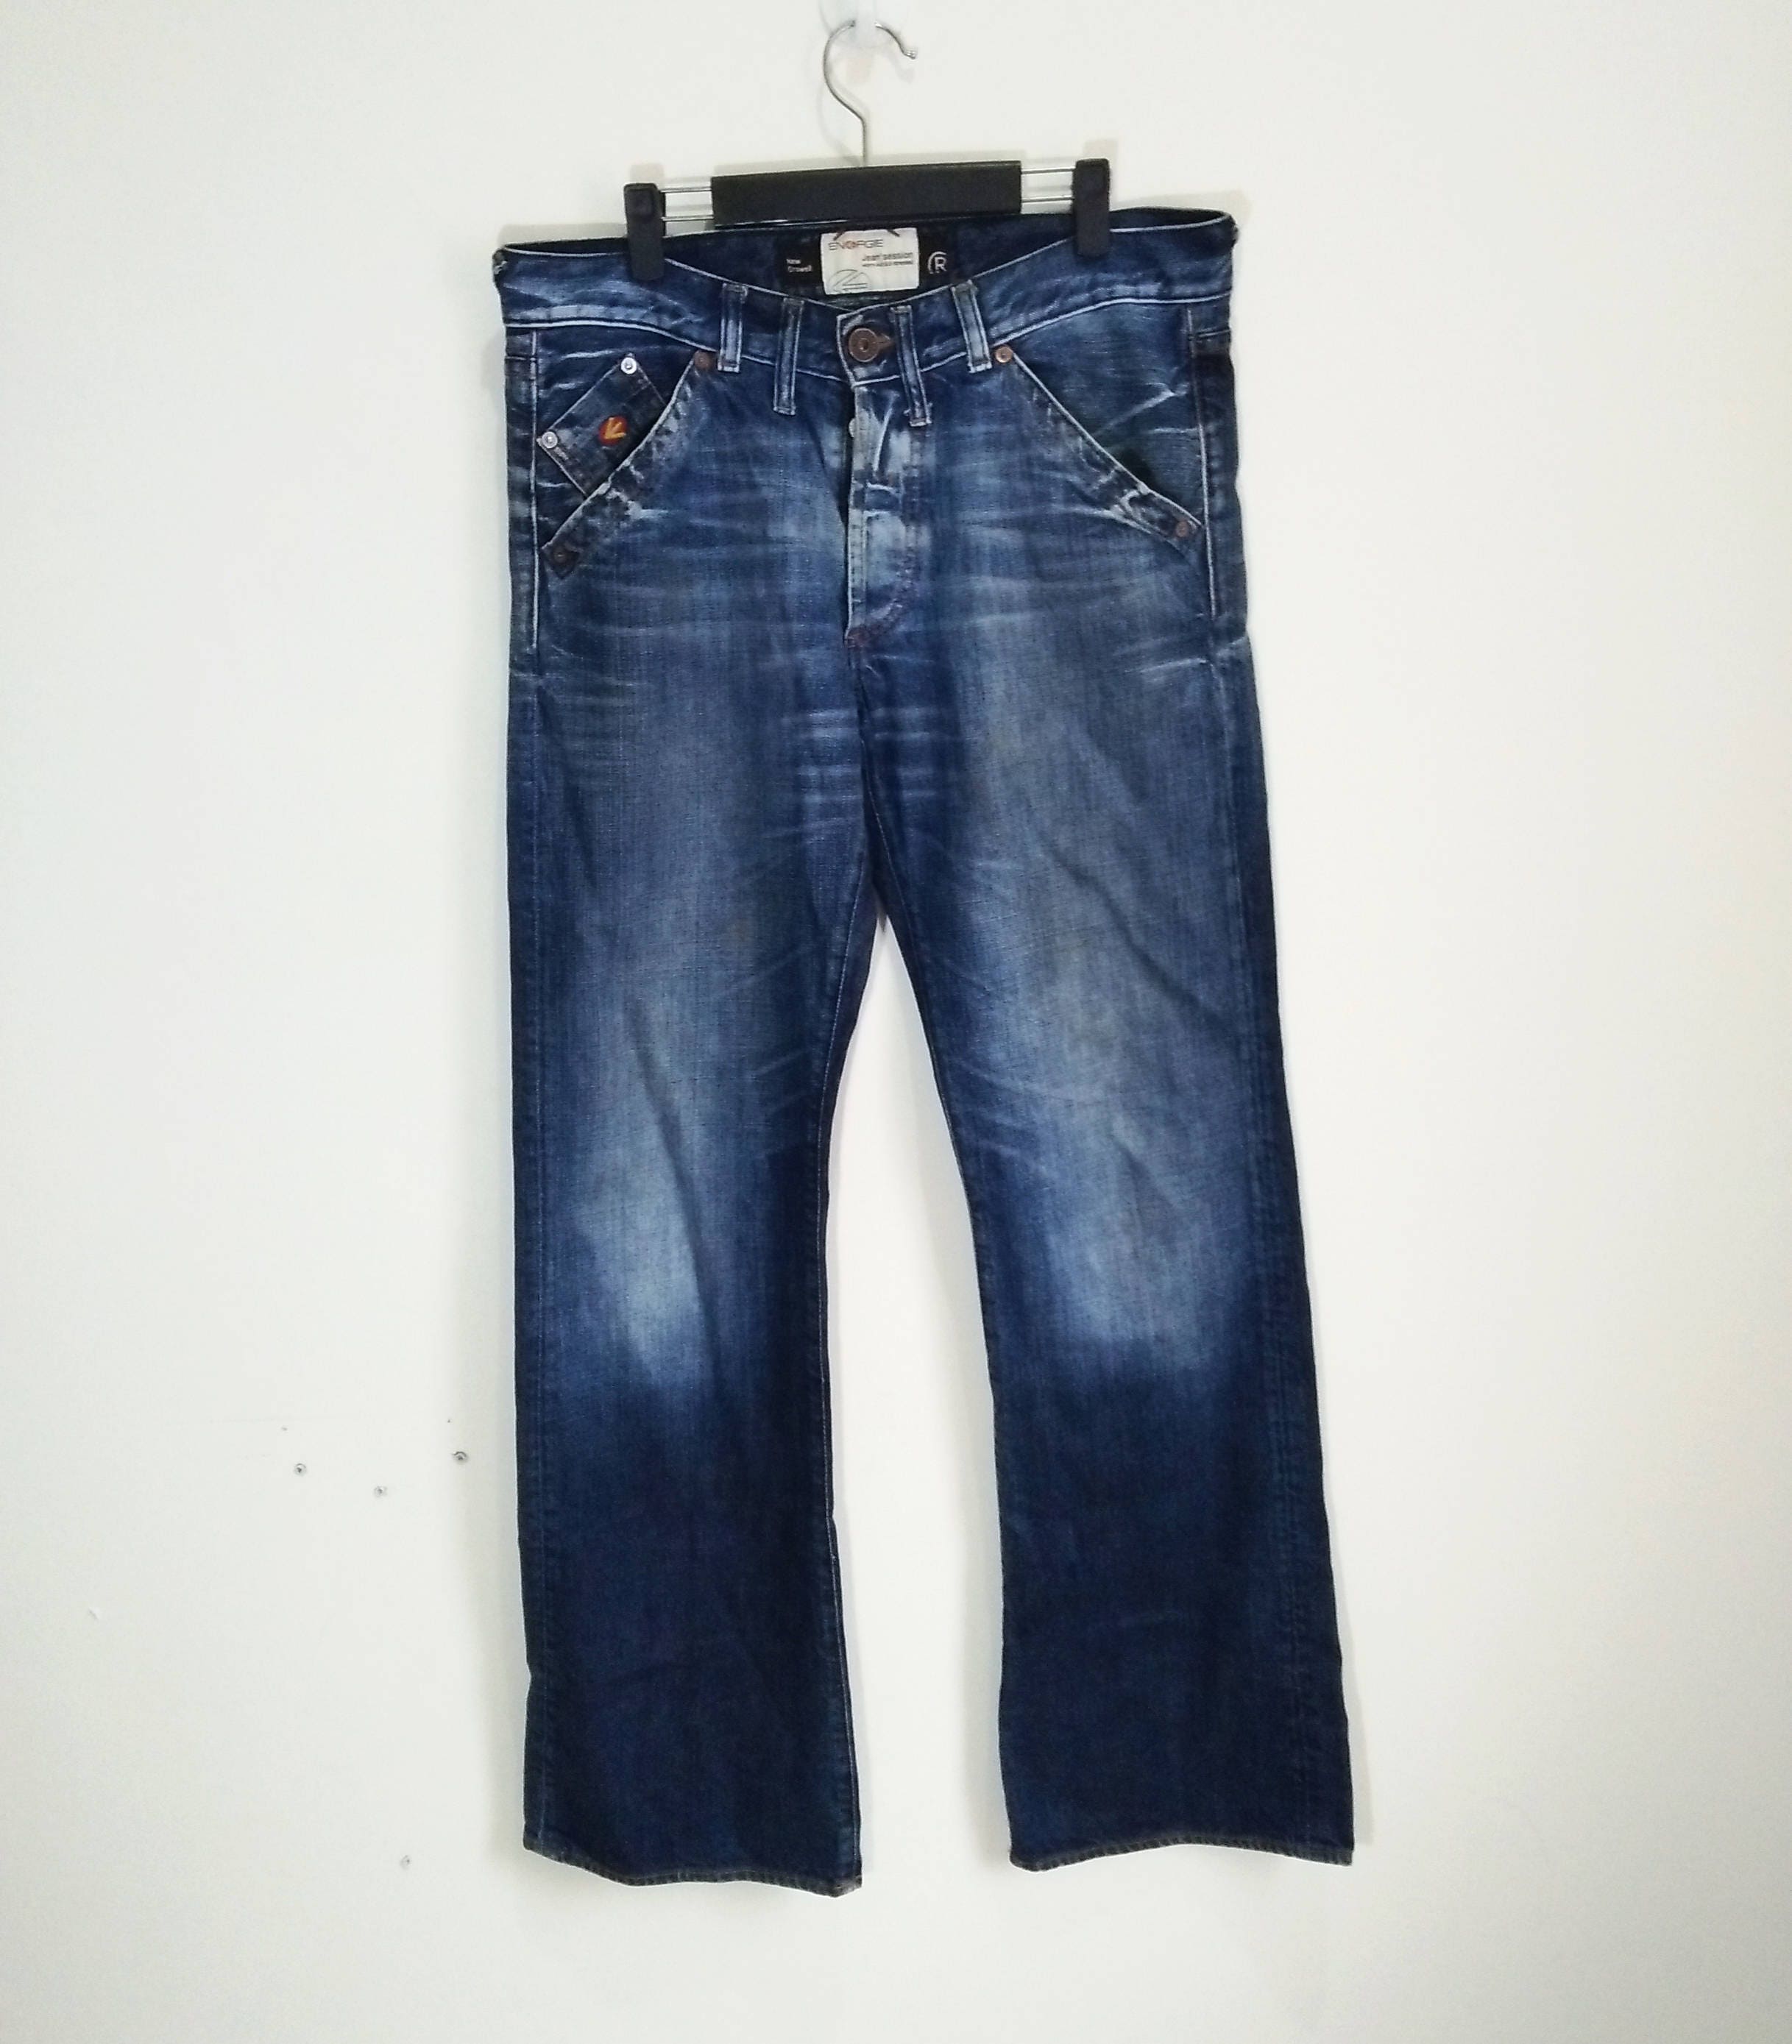 ENERGIE Worn Out Distressed Denim Jeans Men's - Etsy